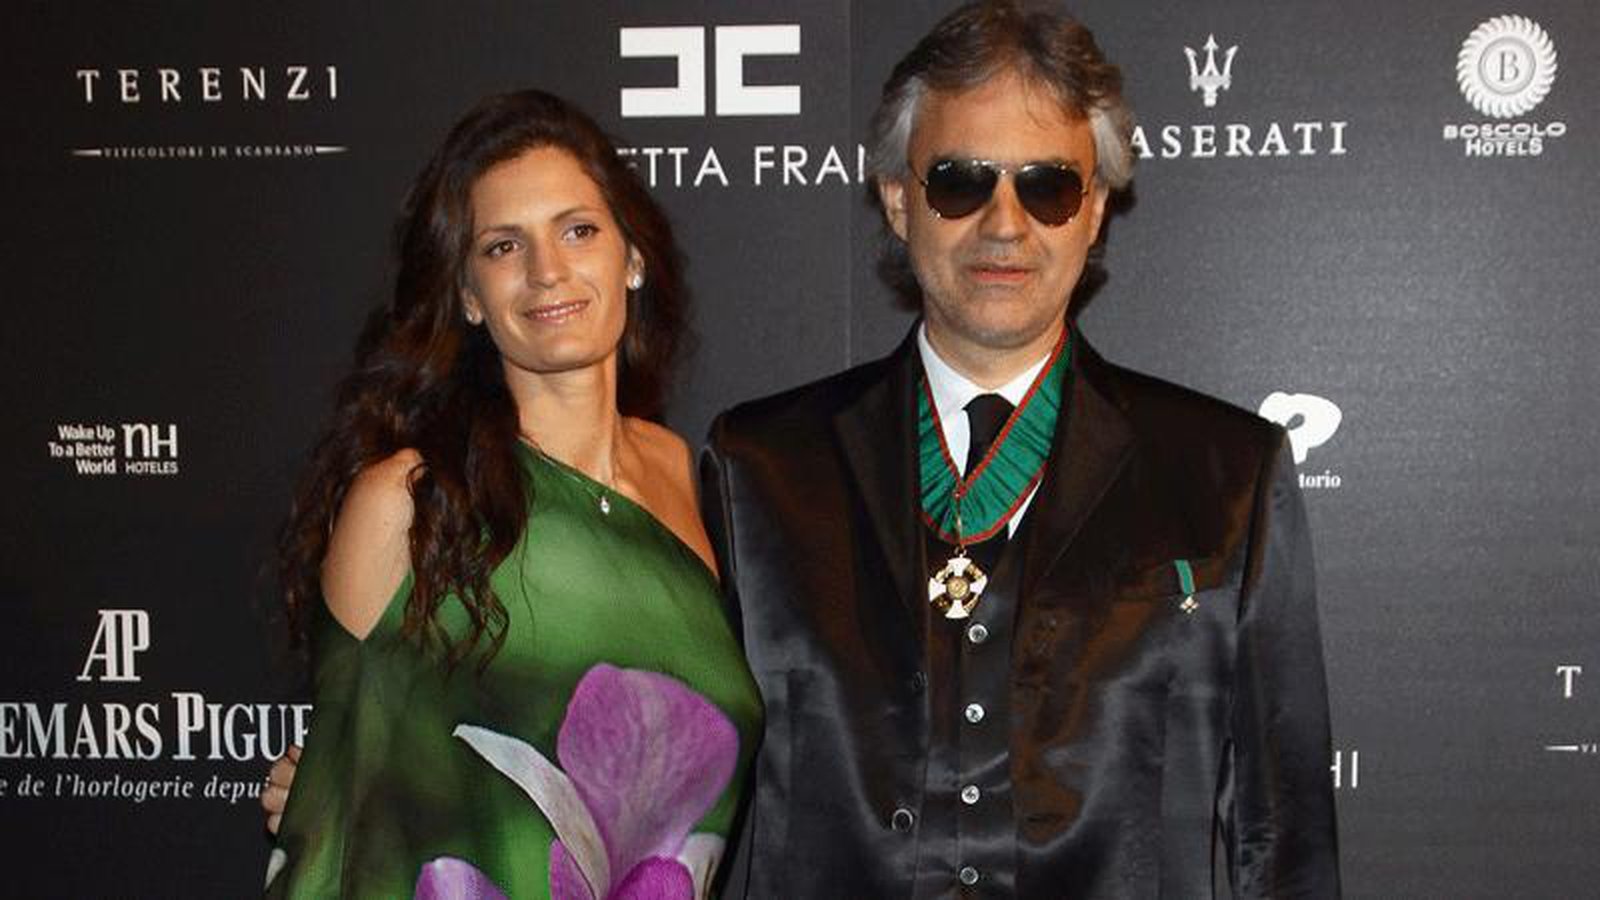 Image of Andrea Bocelli, his wife Enrica Cenzatti and their son Amos